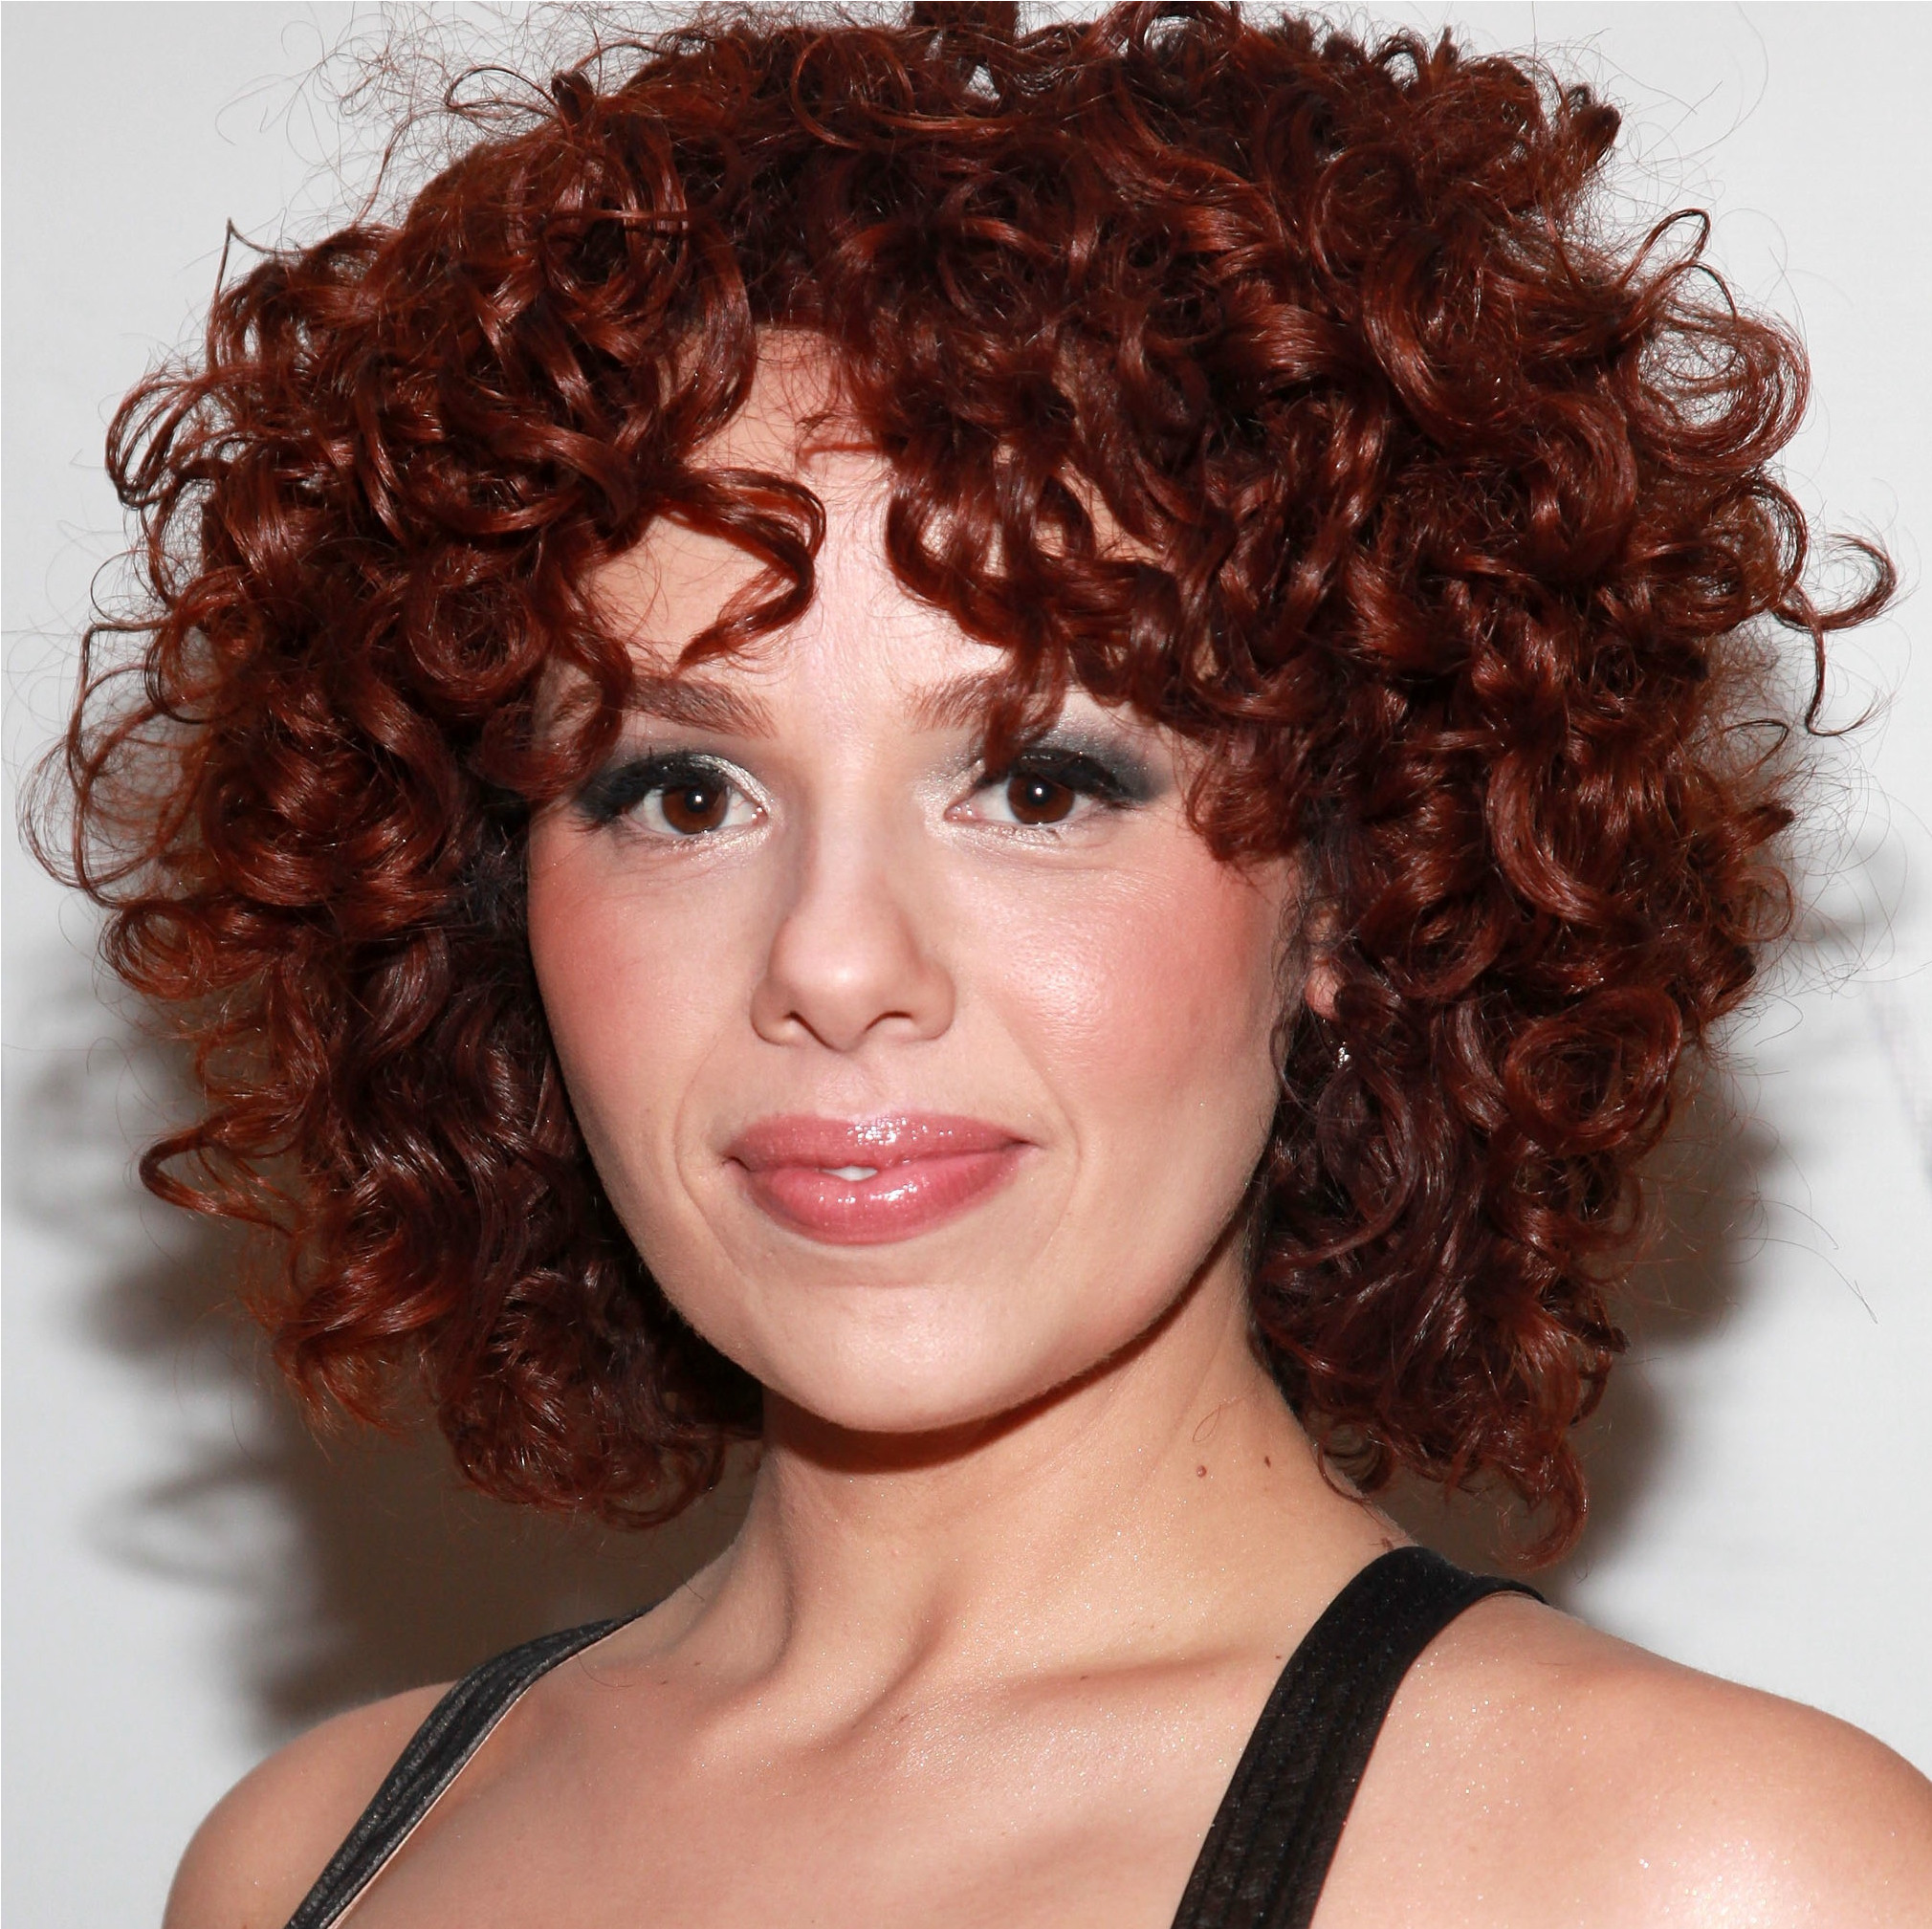 Hairstyles For Curly Hair
 Hairstyles for Short Curly Hair Your Beauty 411